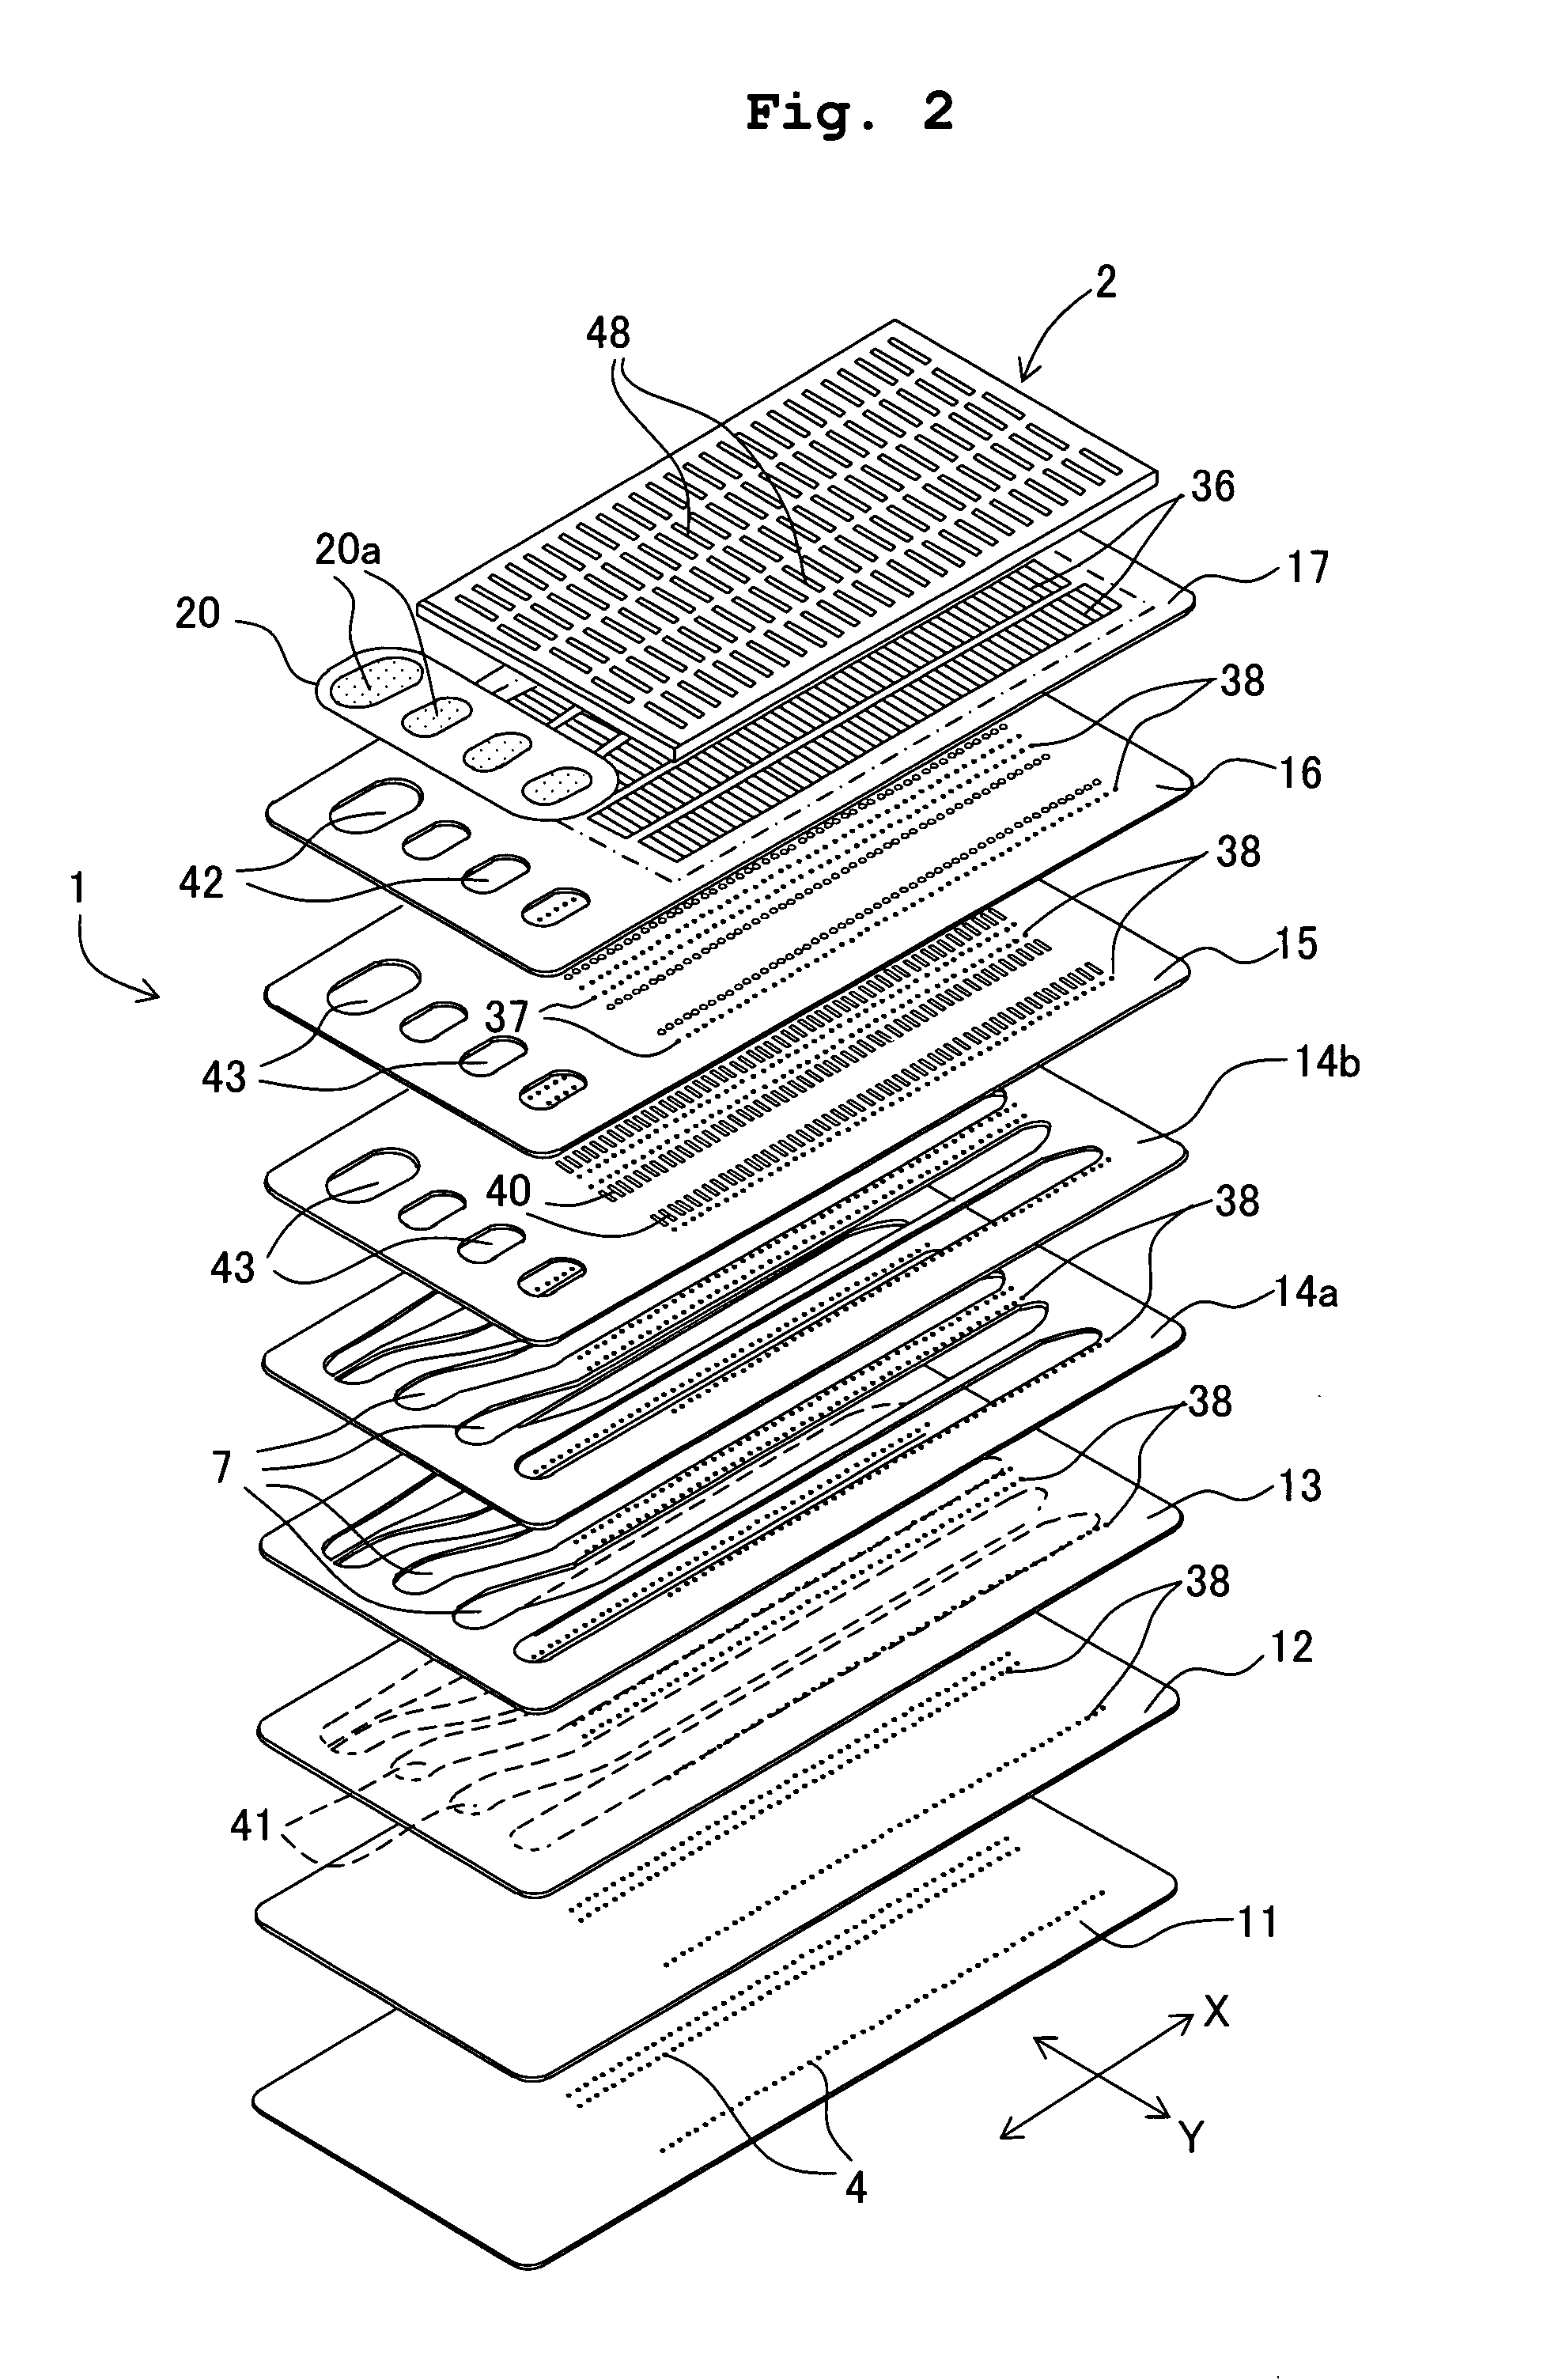 Ink-droplet jetting apparatus